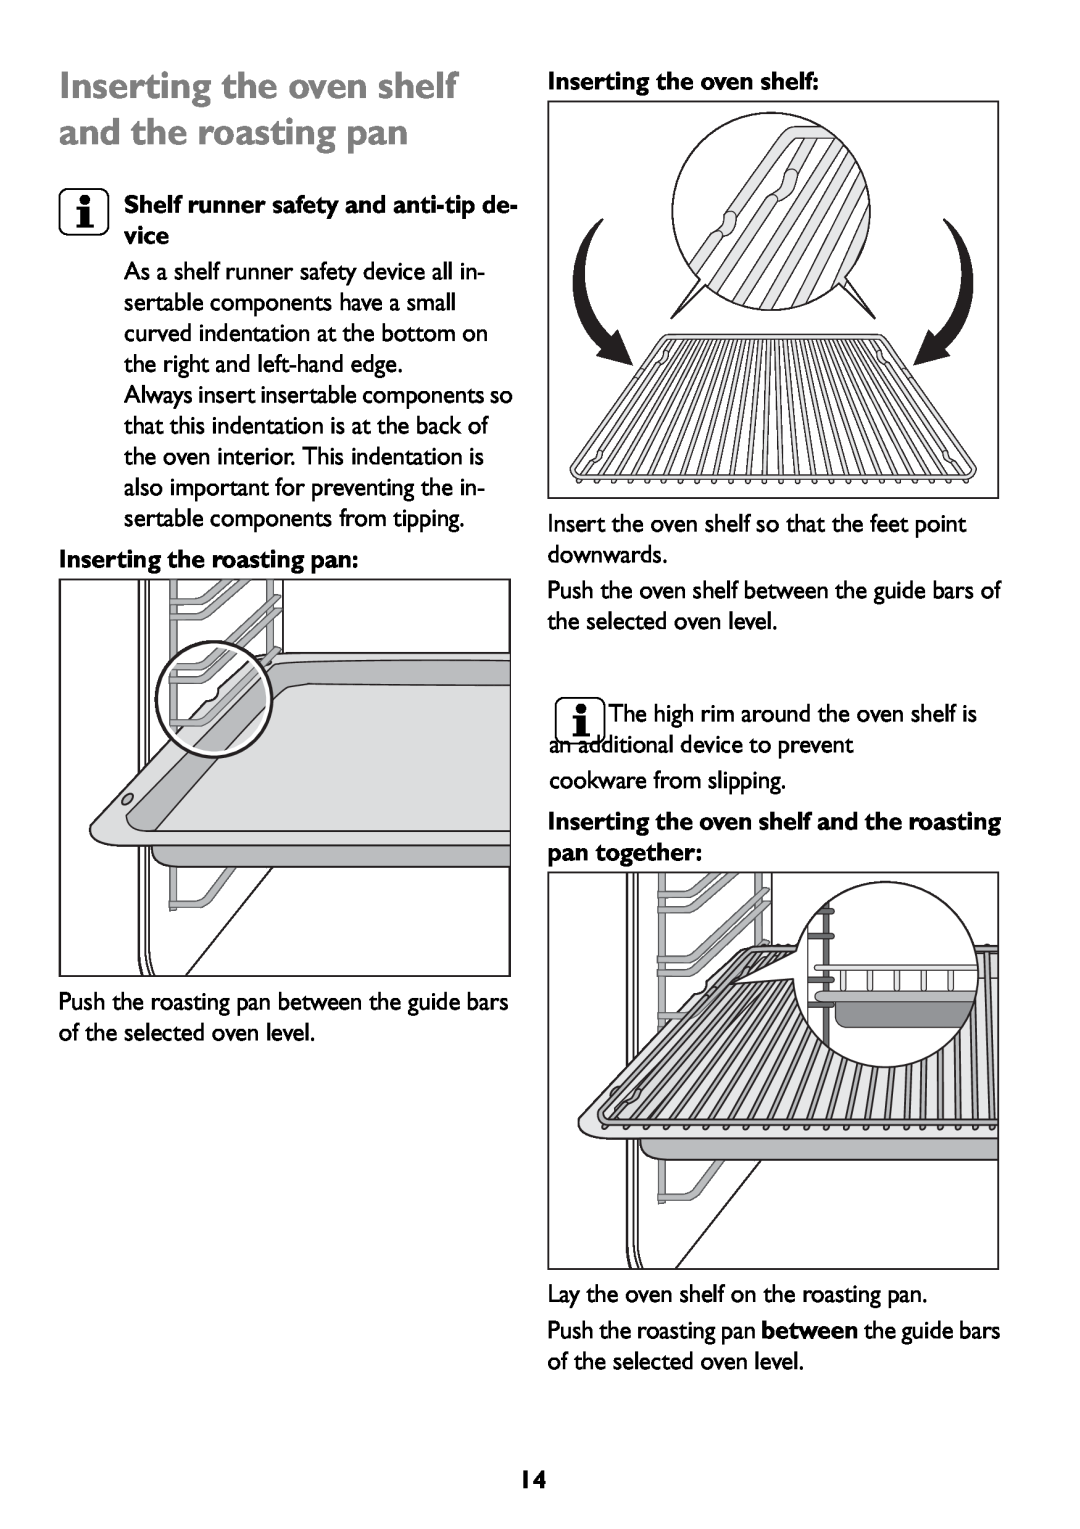 John Lewis JLBIOS607 manual 3Shelf runner safety and anti-tipde- vice, Inserting the roasting pan, Inserting the oven shelf 